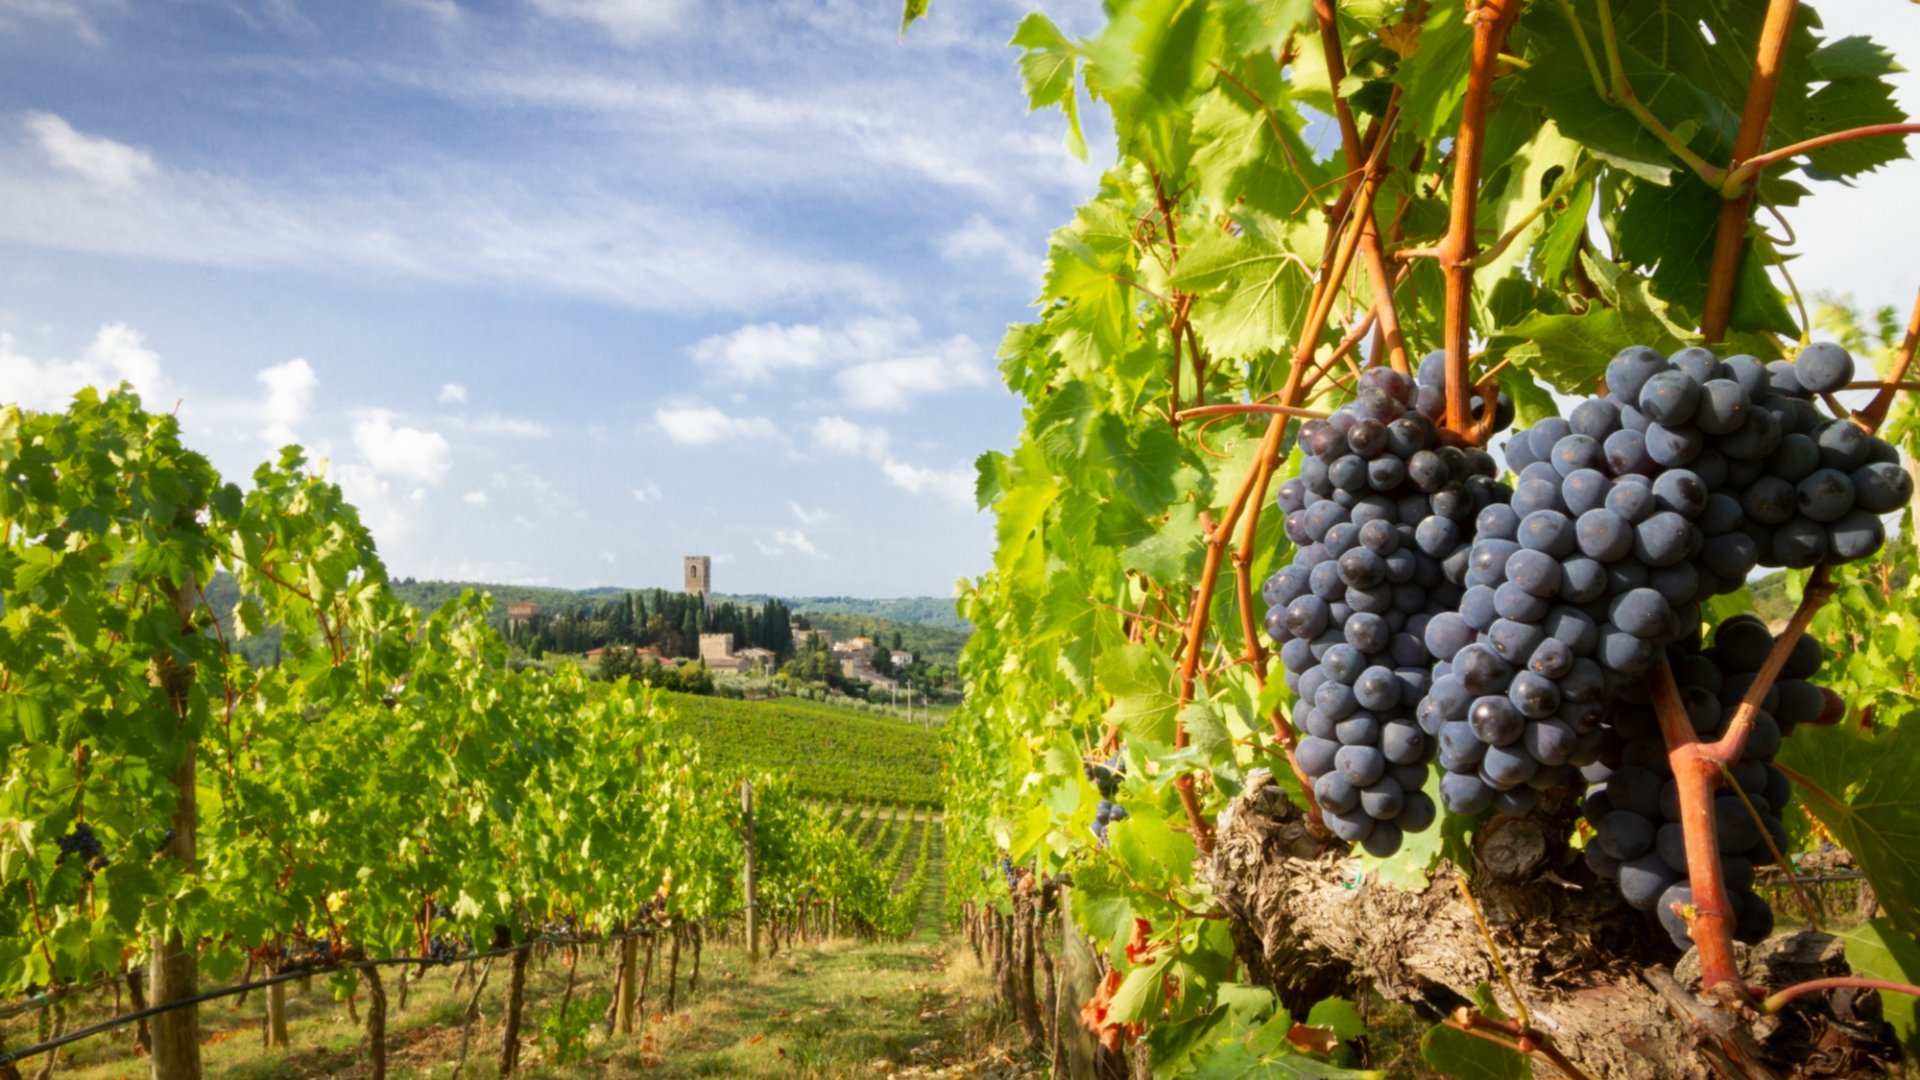 A package of experiences with tasting, cooking and visit to discover the flavors of Chianti